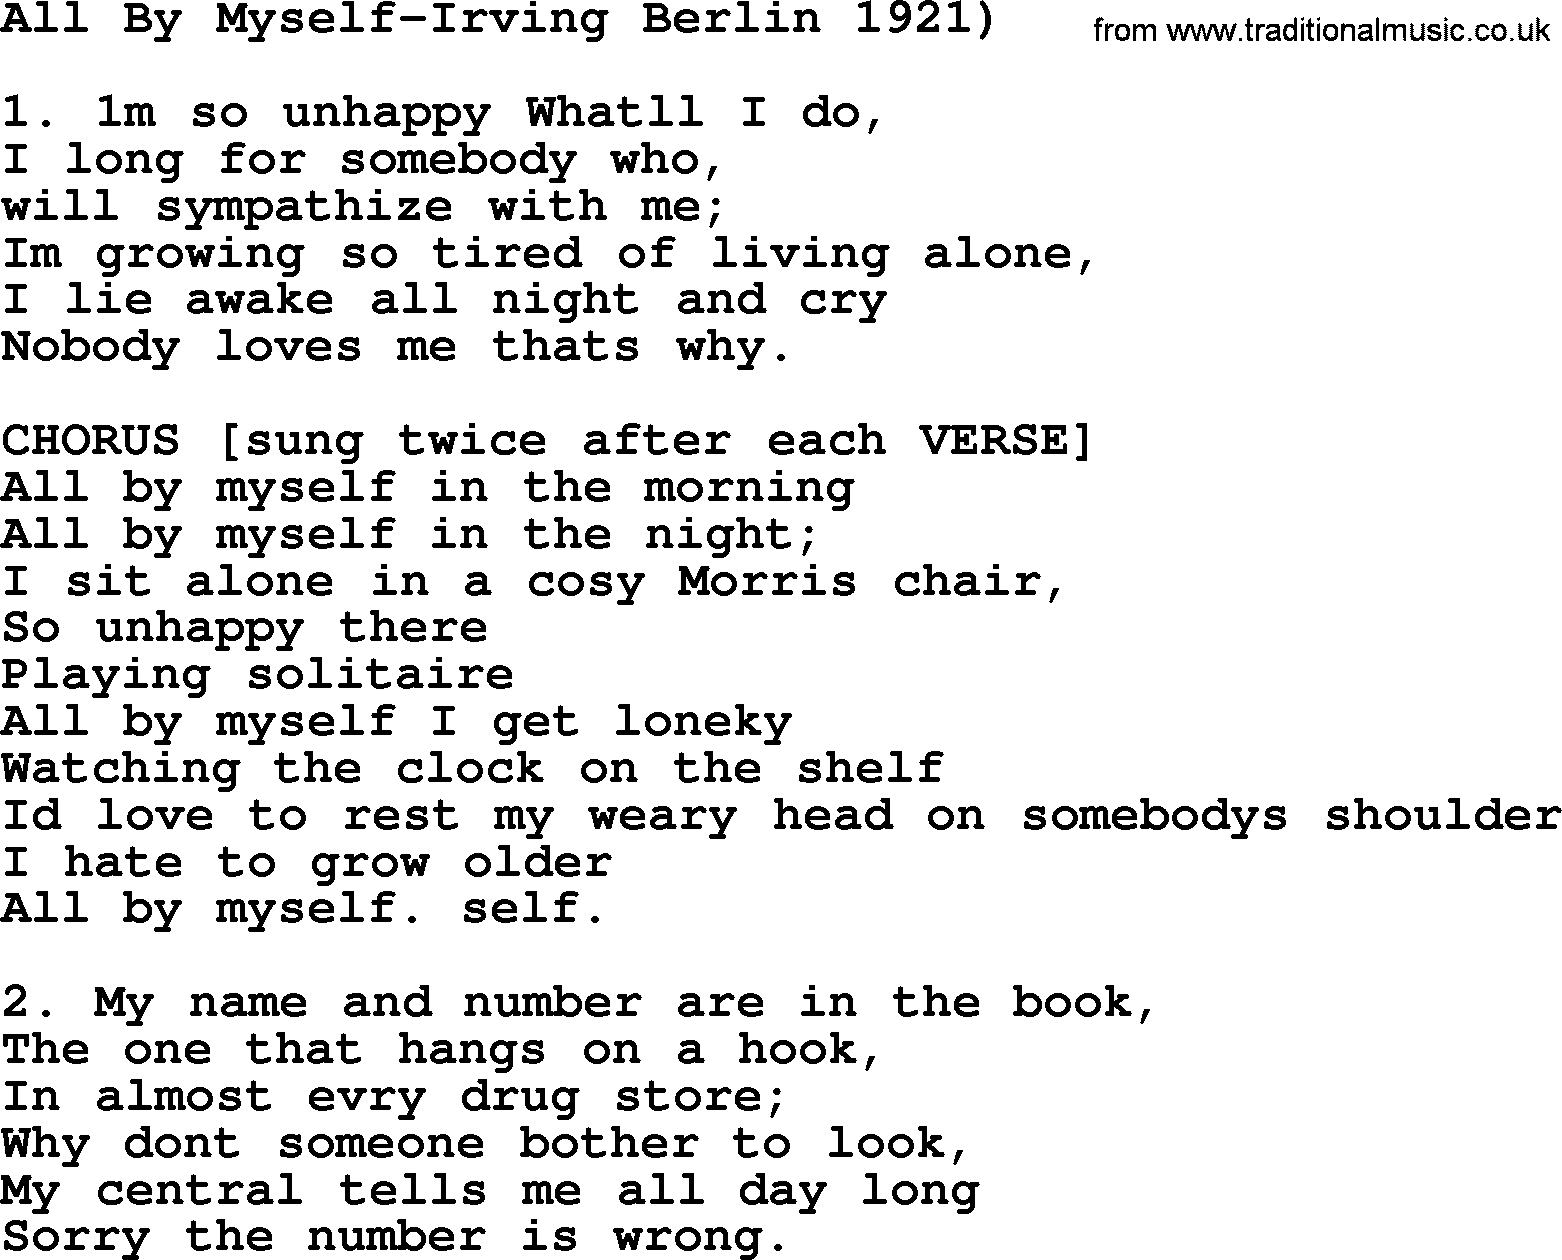 World War(WW1) One Song: All By Myself-Irving Berlin 1921, lyrics and PDF